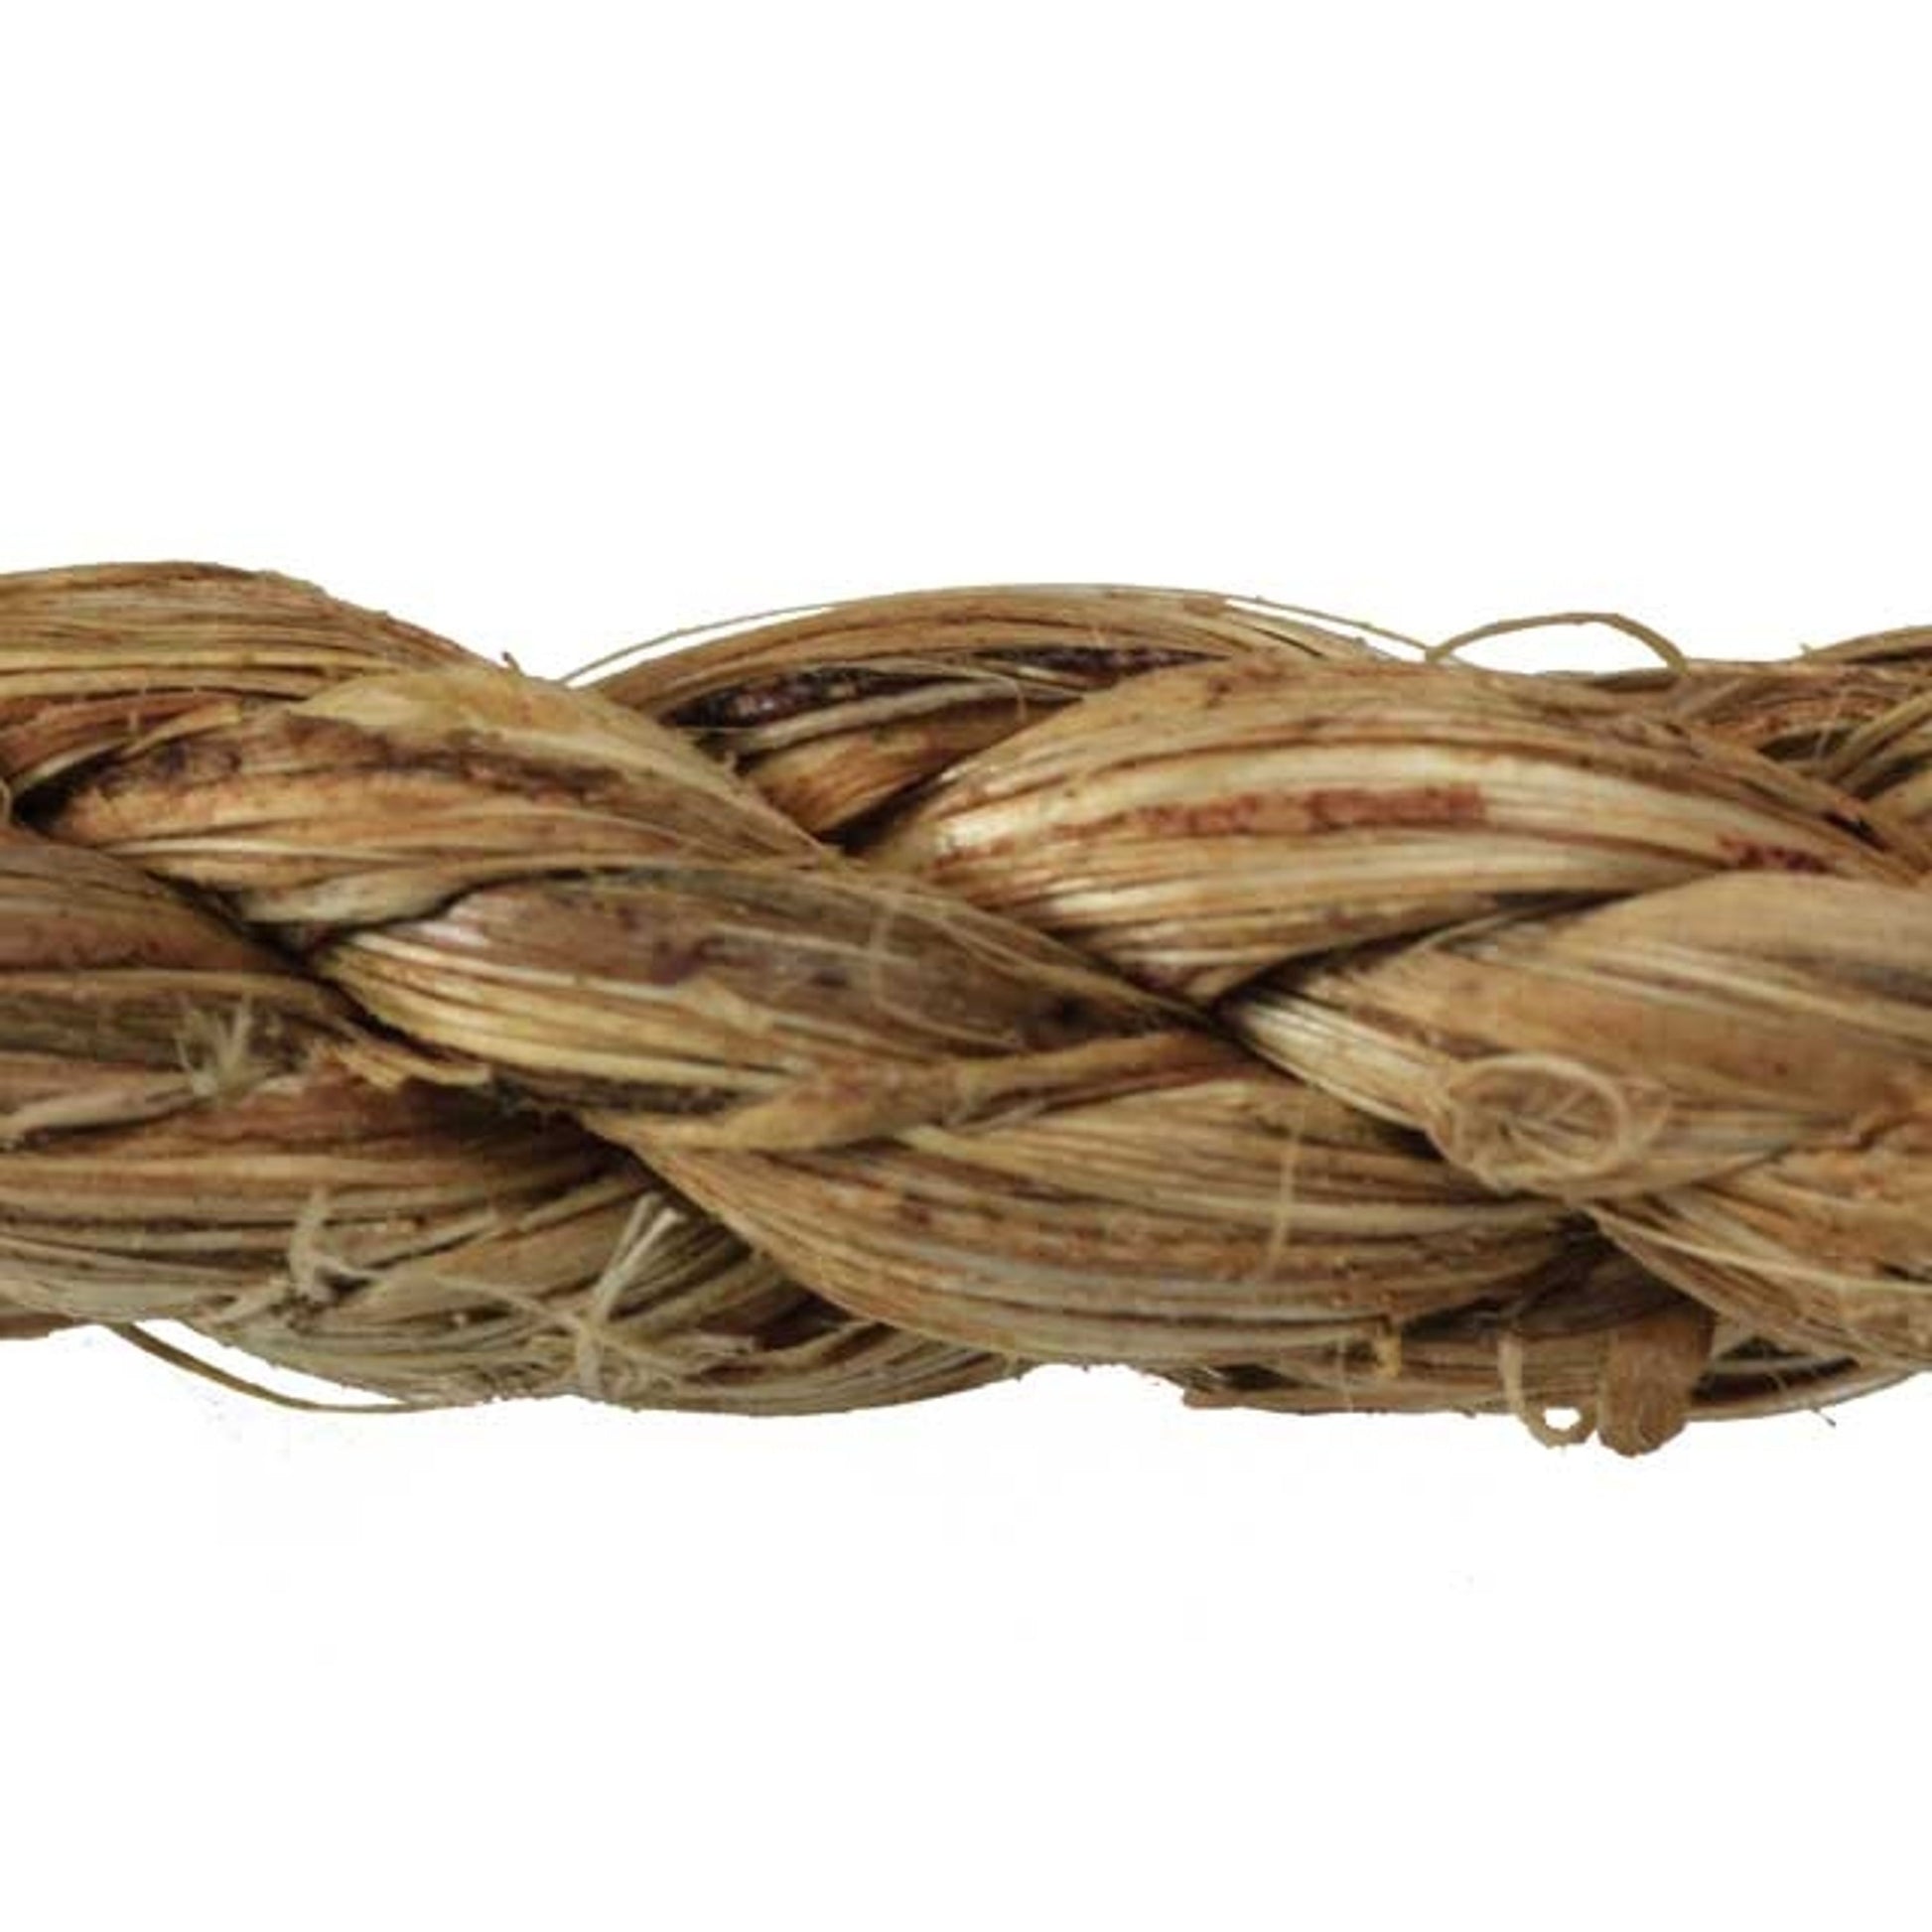 Twisted Manila Rope (3/8 inch) - SGT KNOTS - 3 Strand Natural